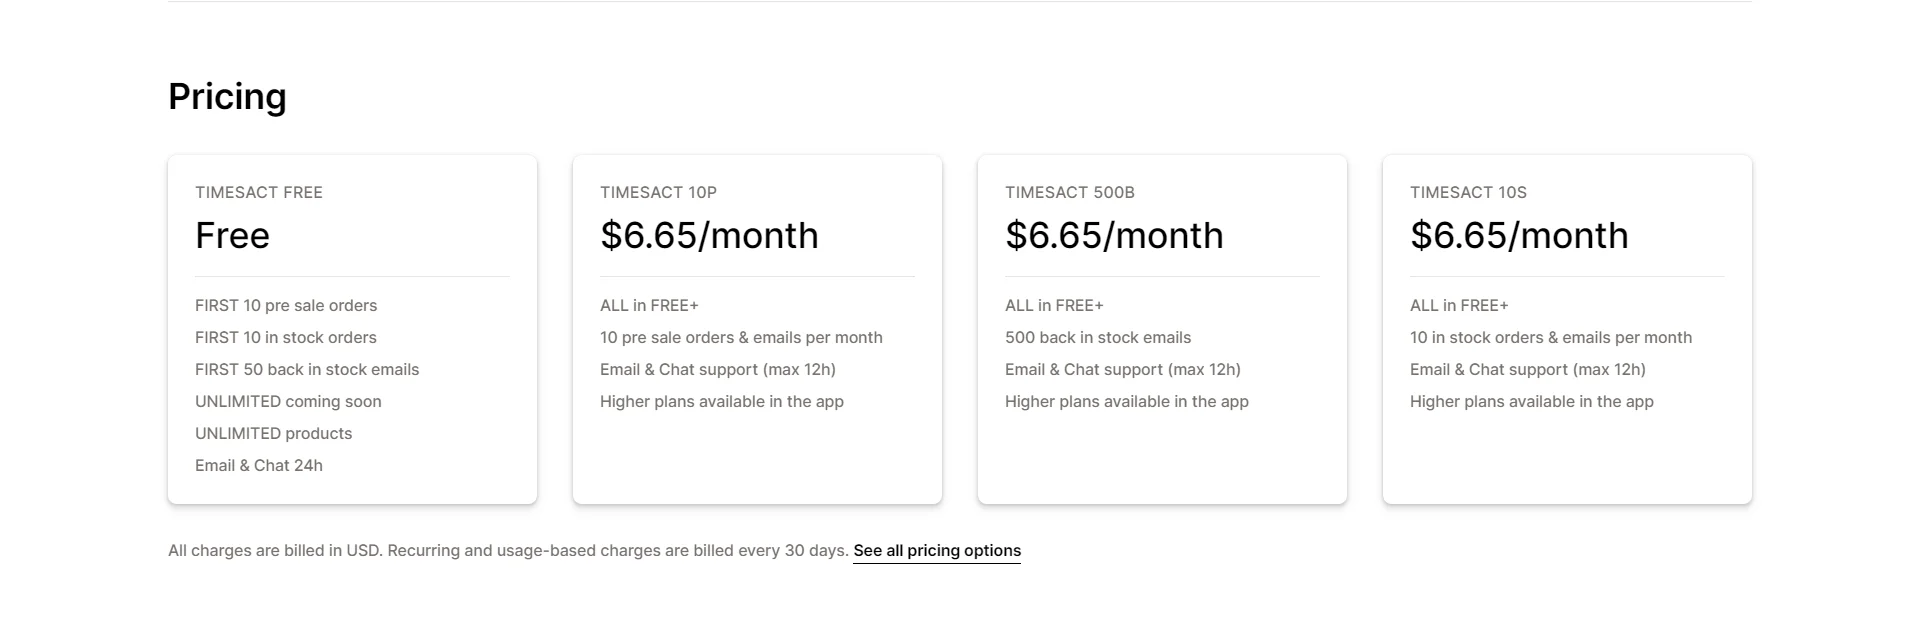 Timesact Pricing - Shopify Pre Order Apps